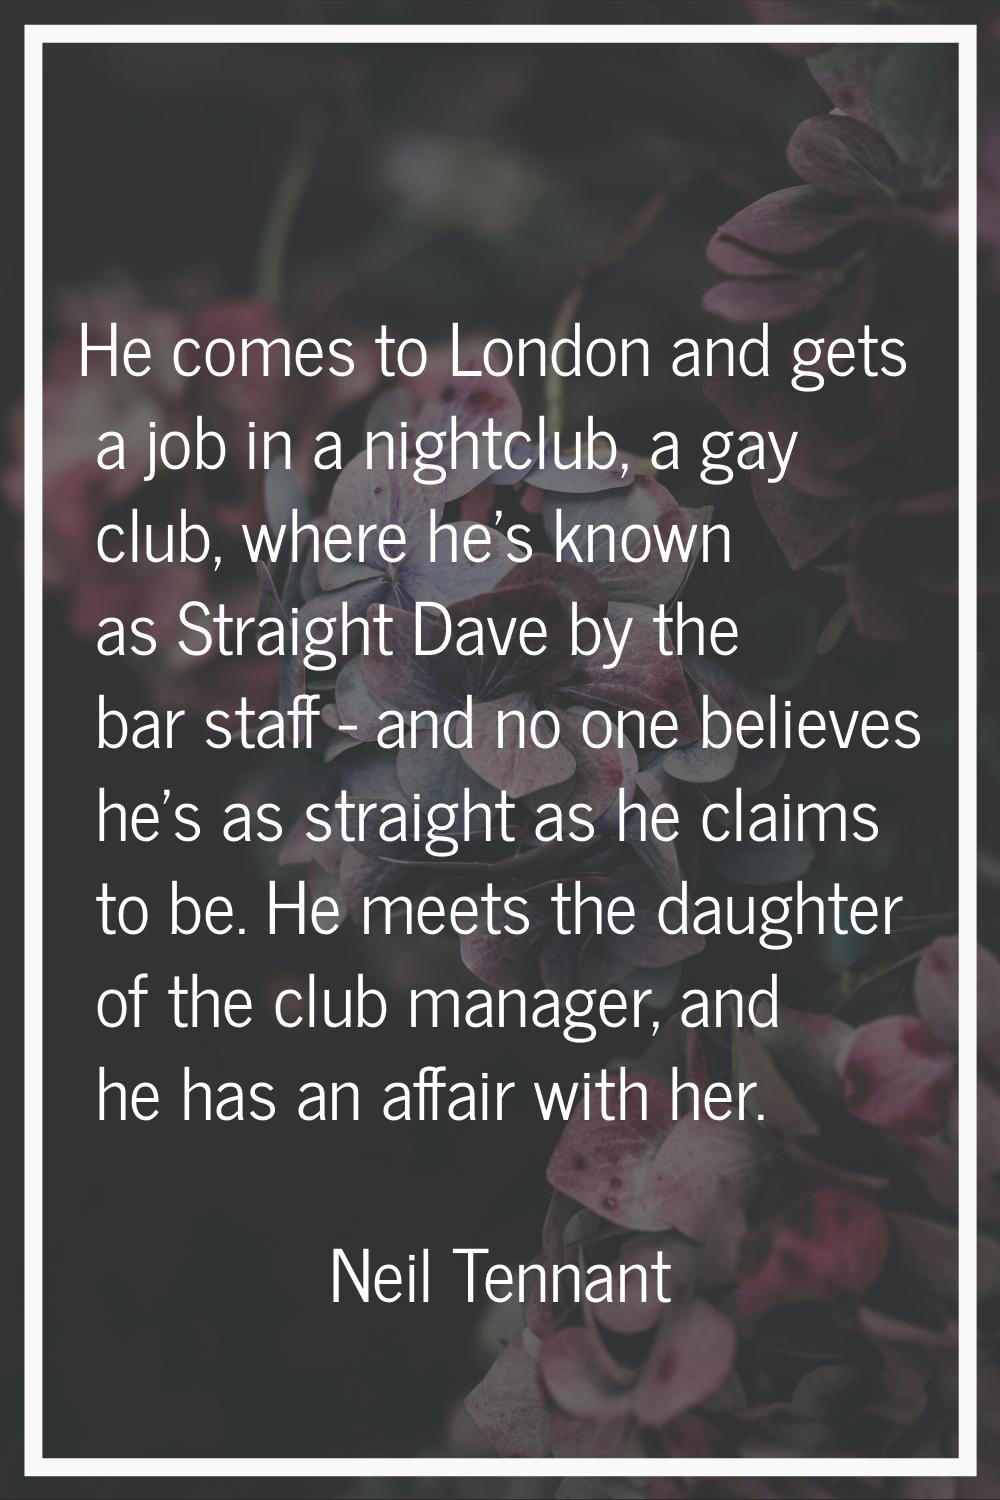 He comes to London and gets a job in a nightclub, a gay club, where he's known as Straight Dave by 